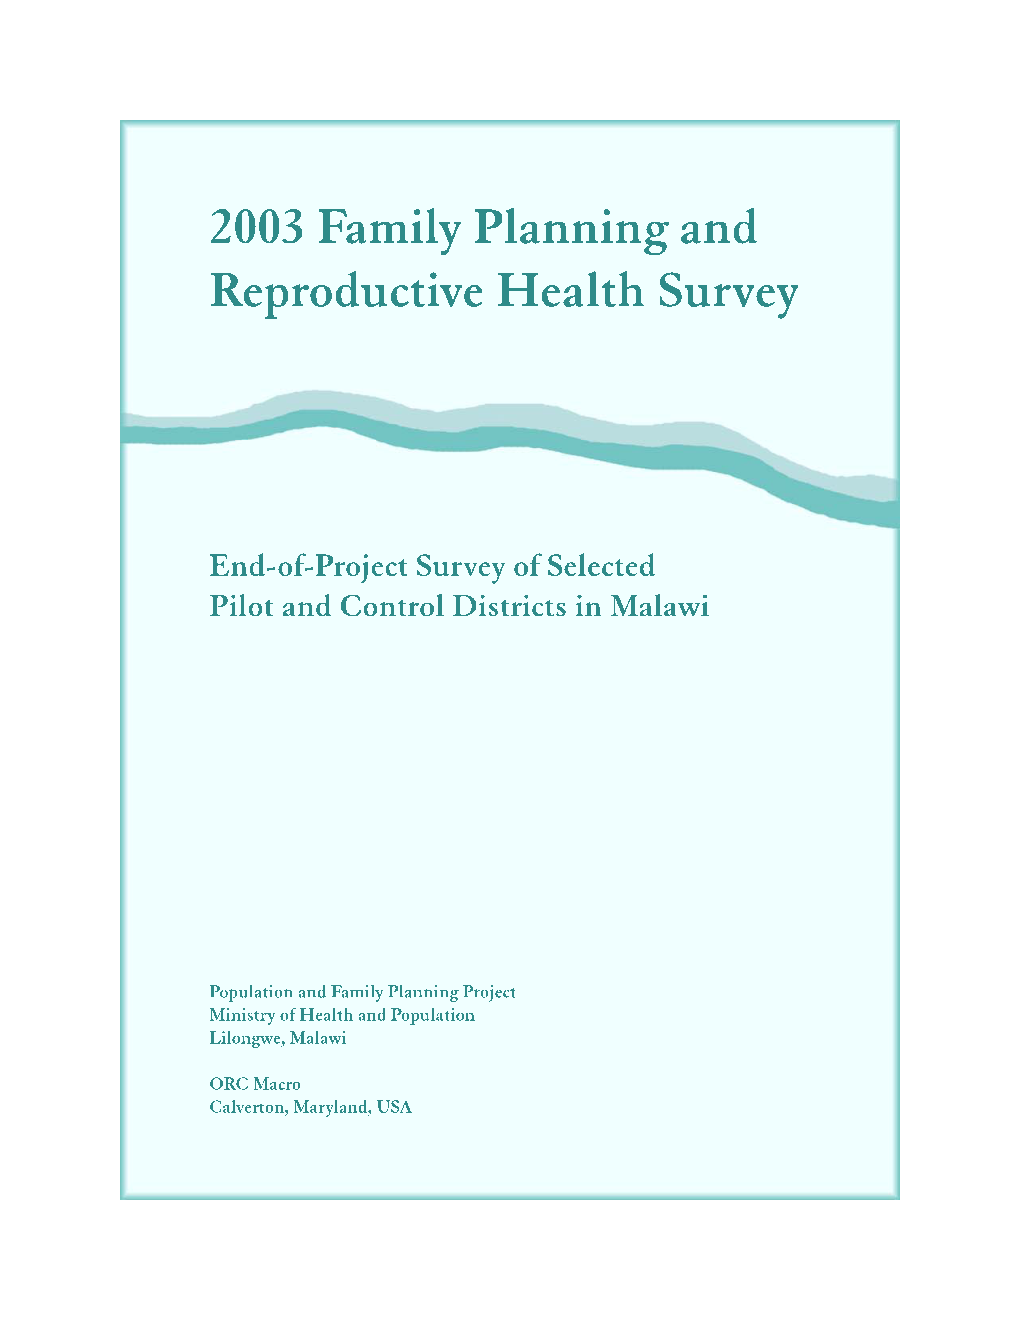 Family Planning and Reproductive Health Survey 2003